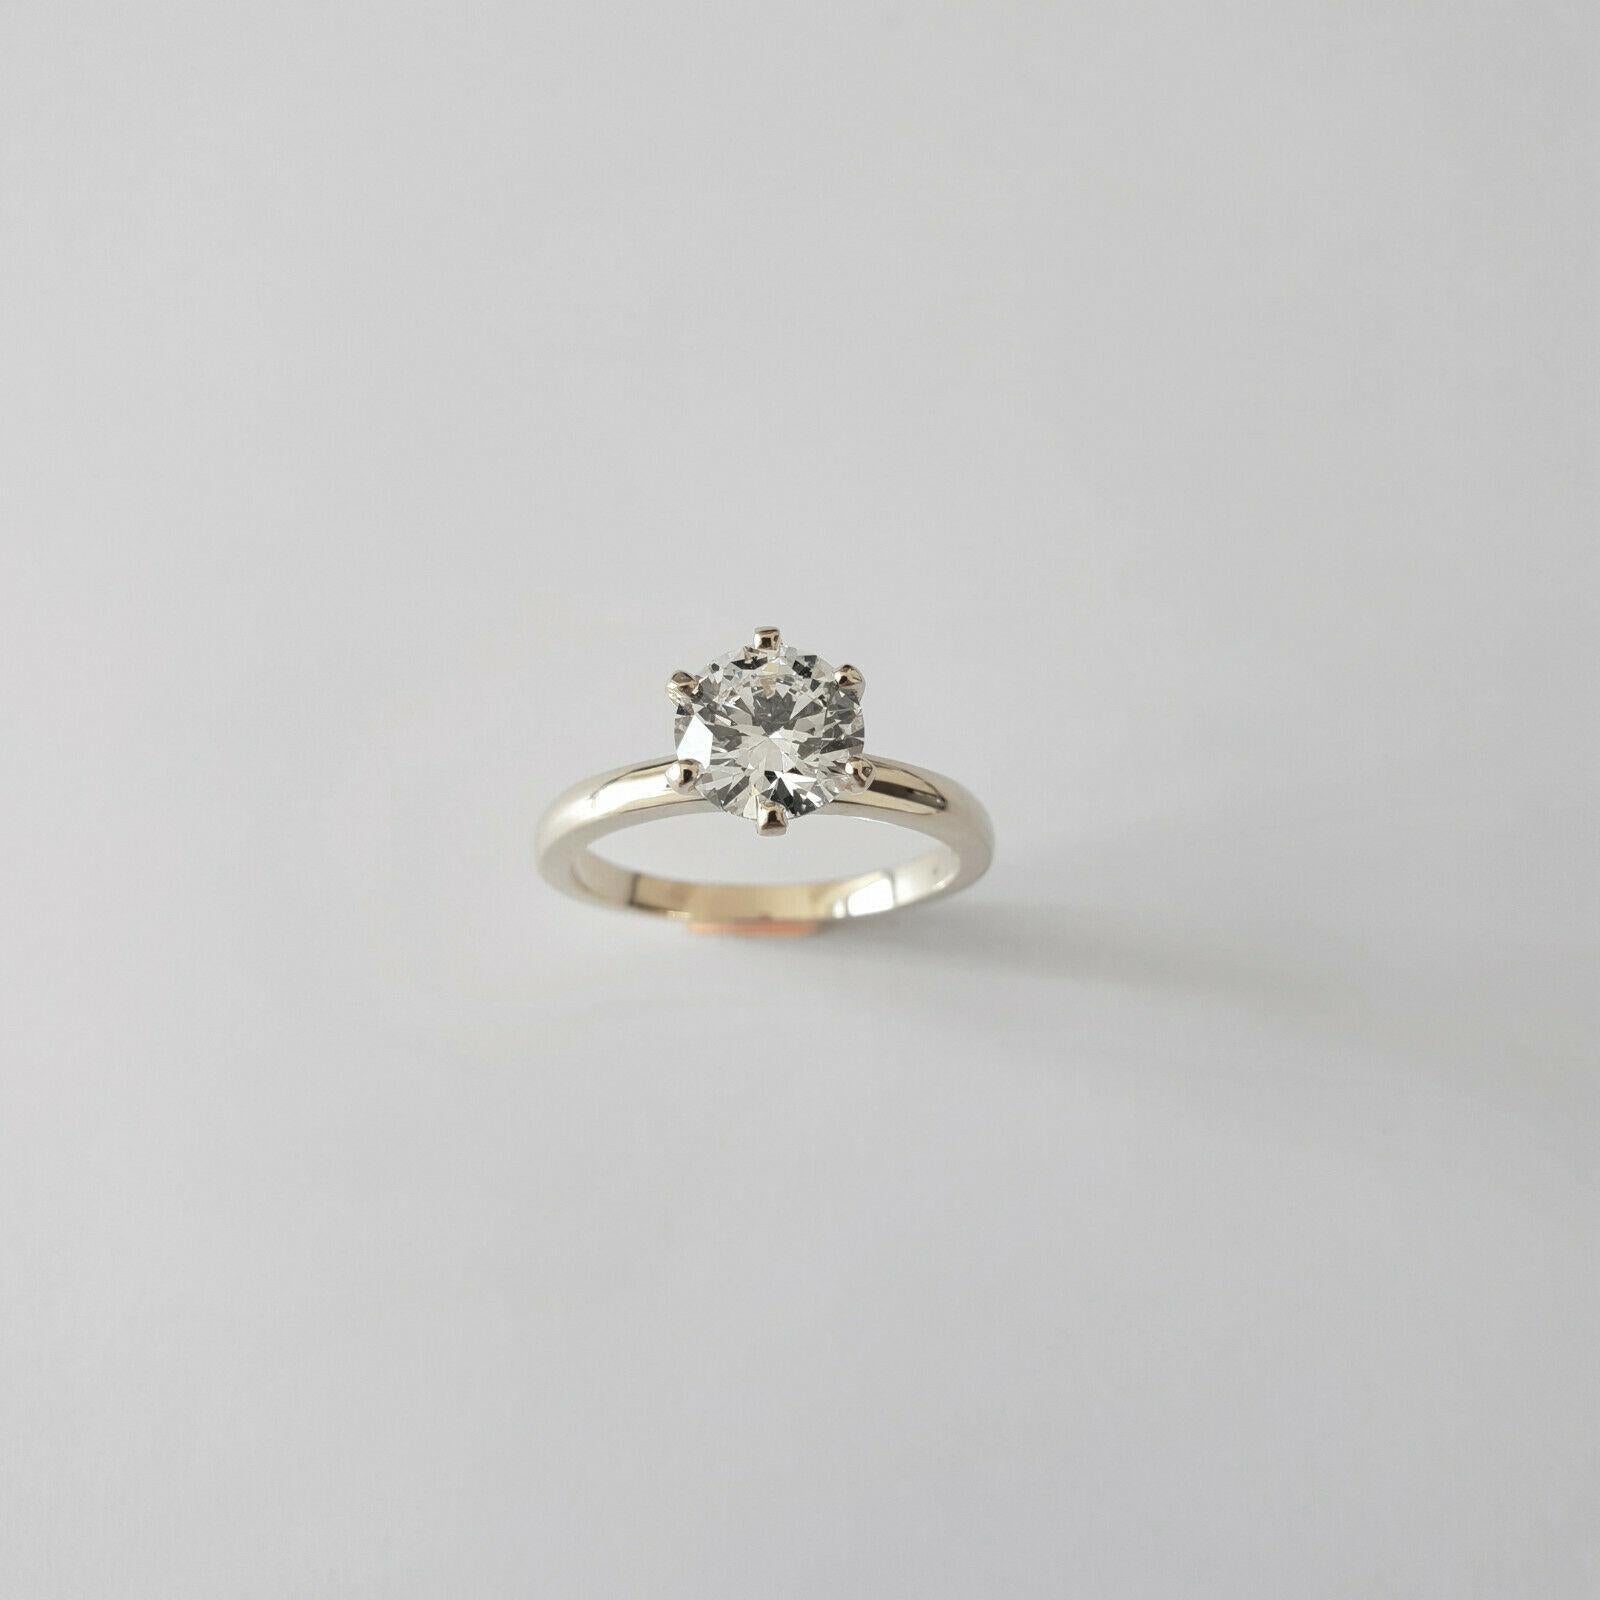 Modern GIA Certified Diamond 0.5-0.55 F/SI1 Solitaire Ring 750 Gold in 6 Prong Setting For Sale